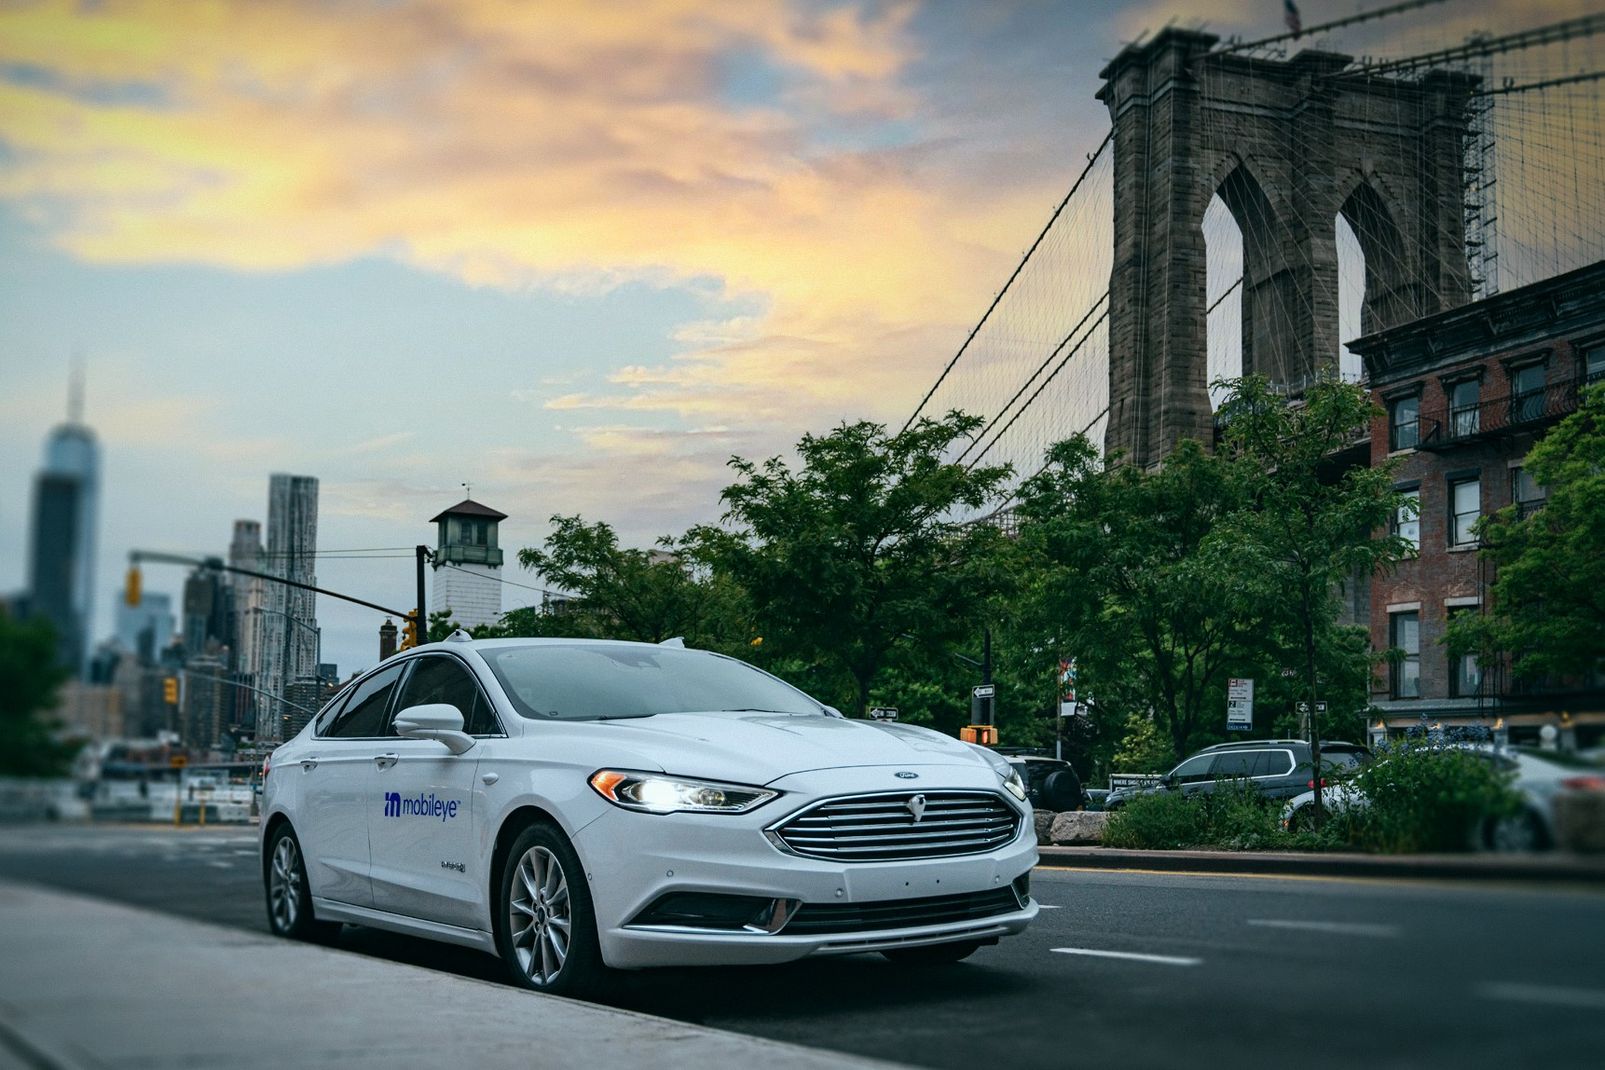 Tested in some of the most challenging cities in the world, Mobileye SuperVision is our bridge to consumer autonomous vehicles.